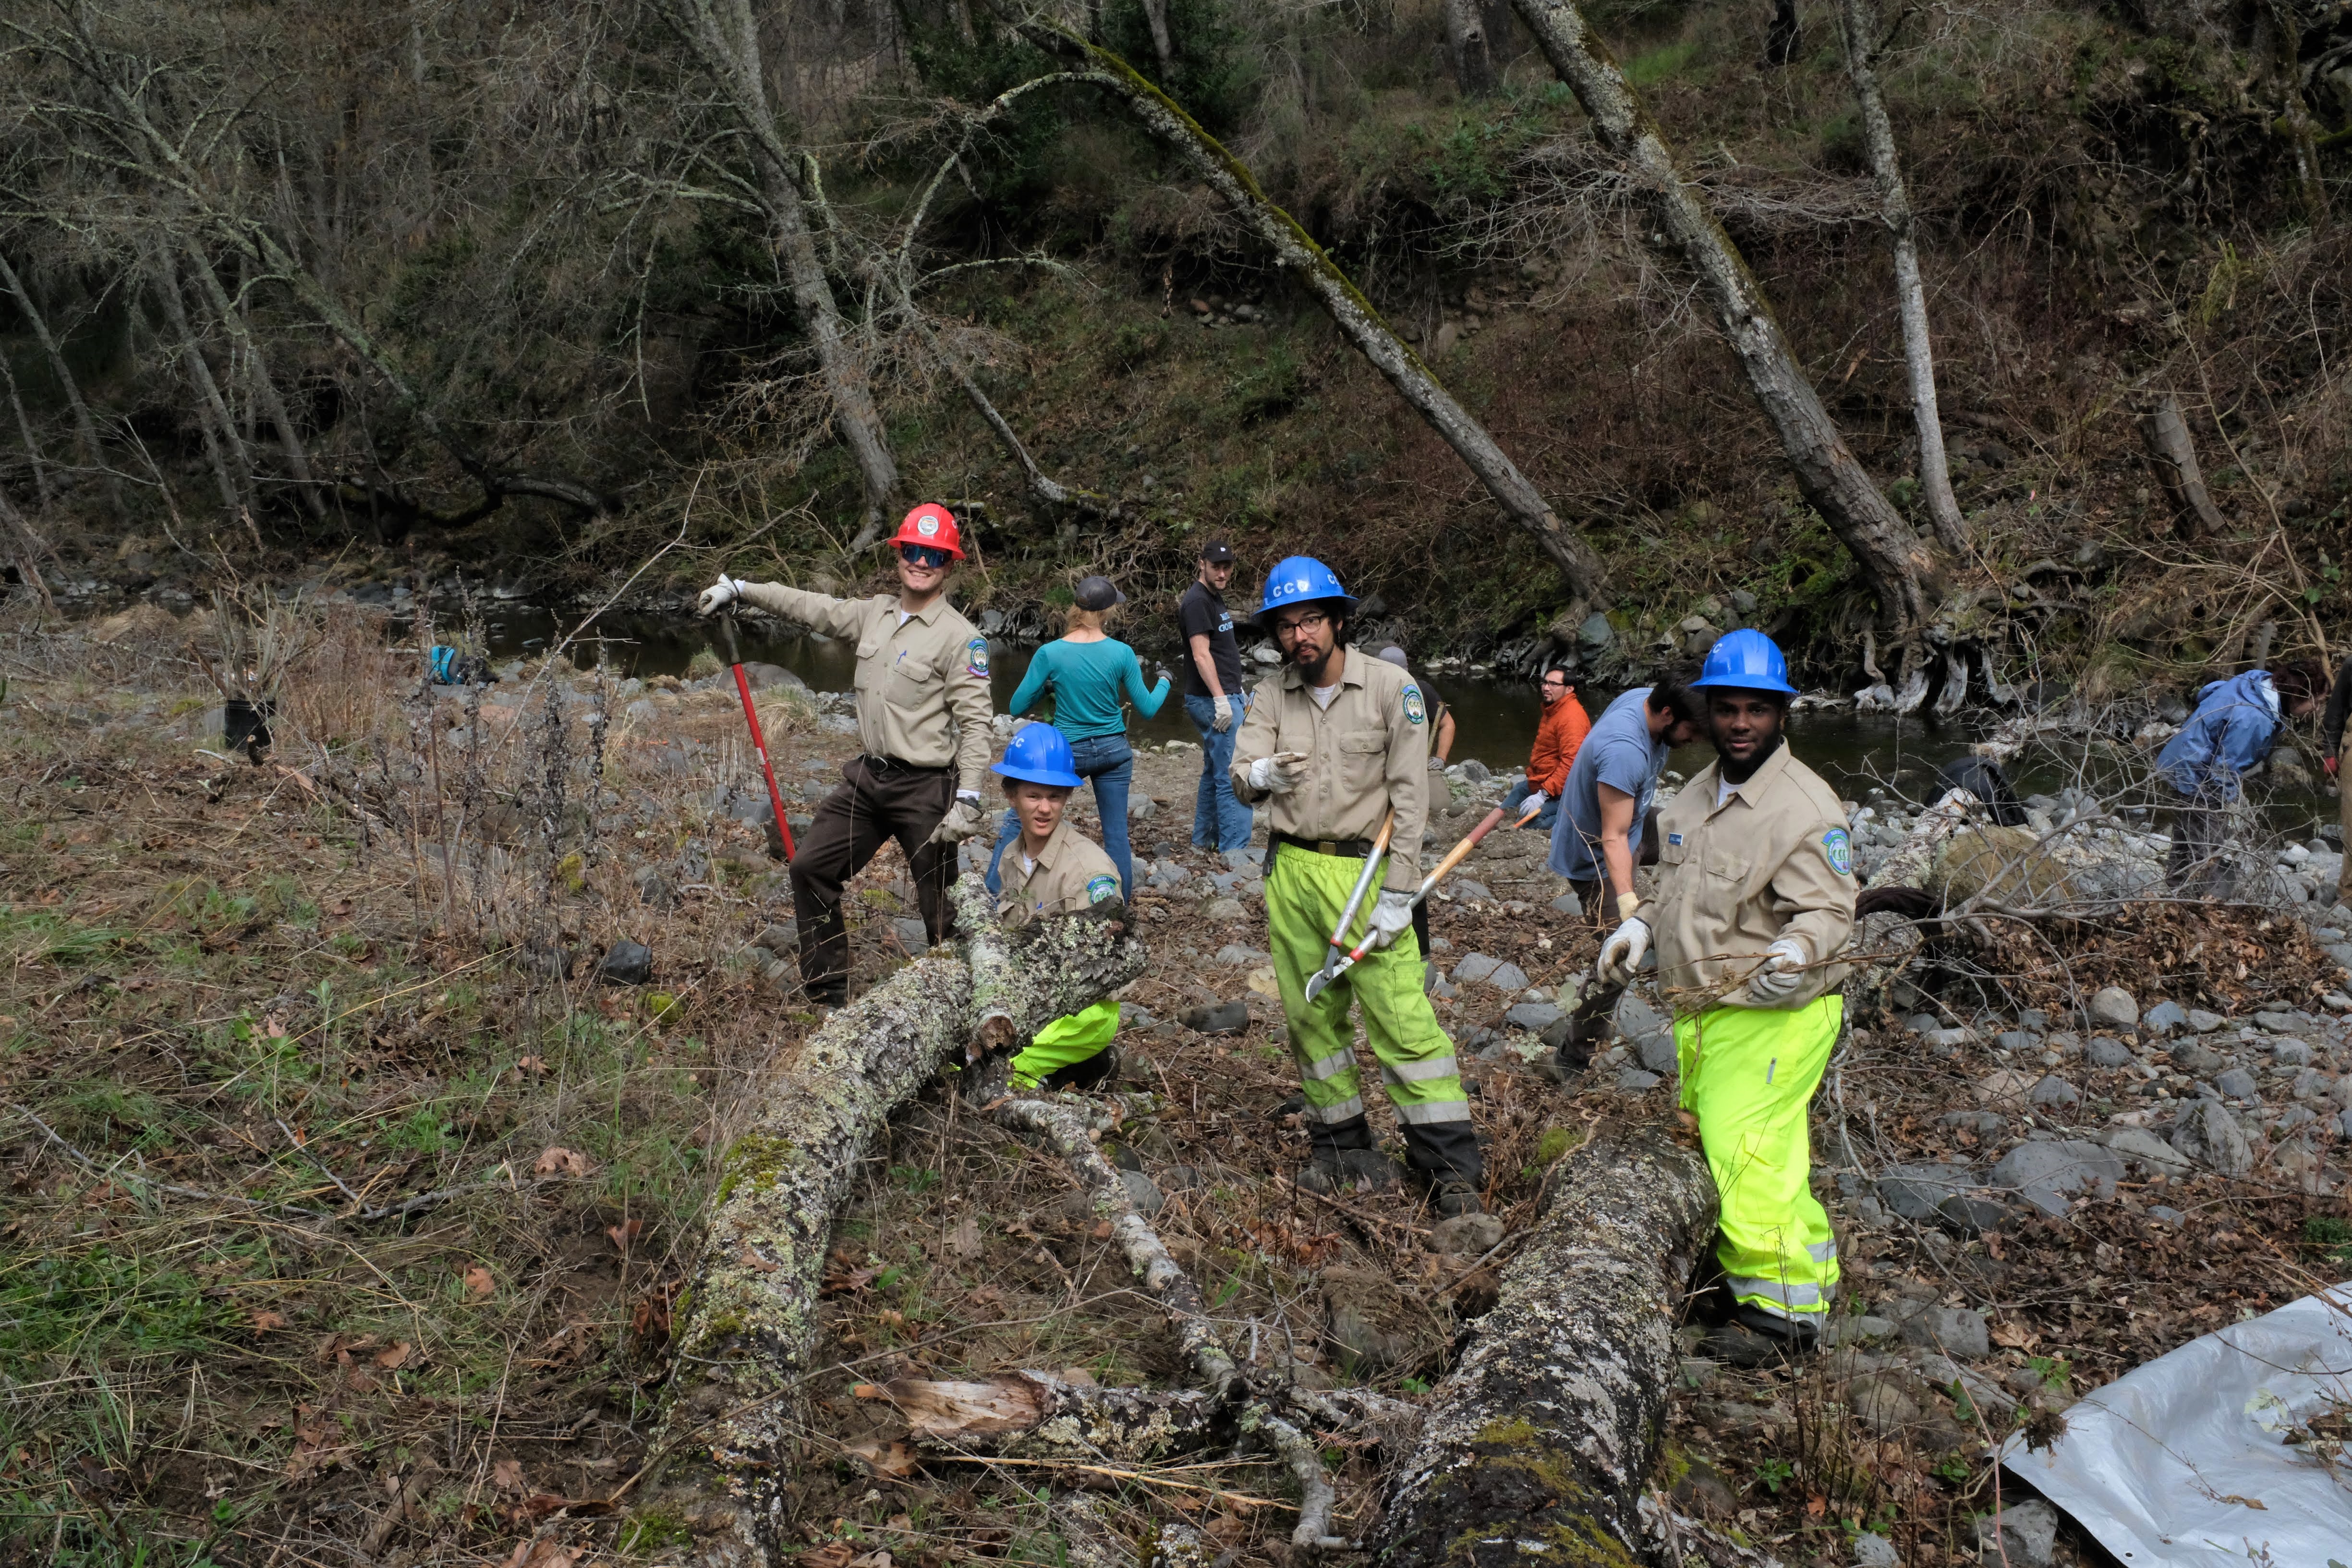 California Conservation Corps members from Ukiah removing invasive plants with style.